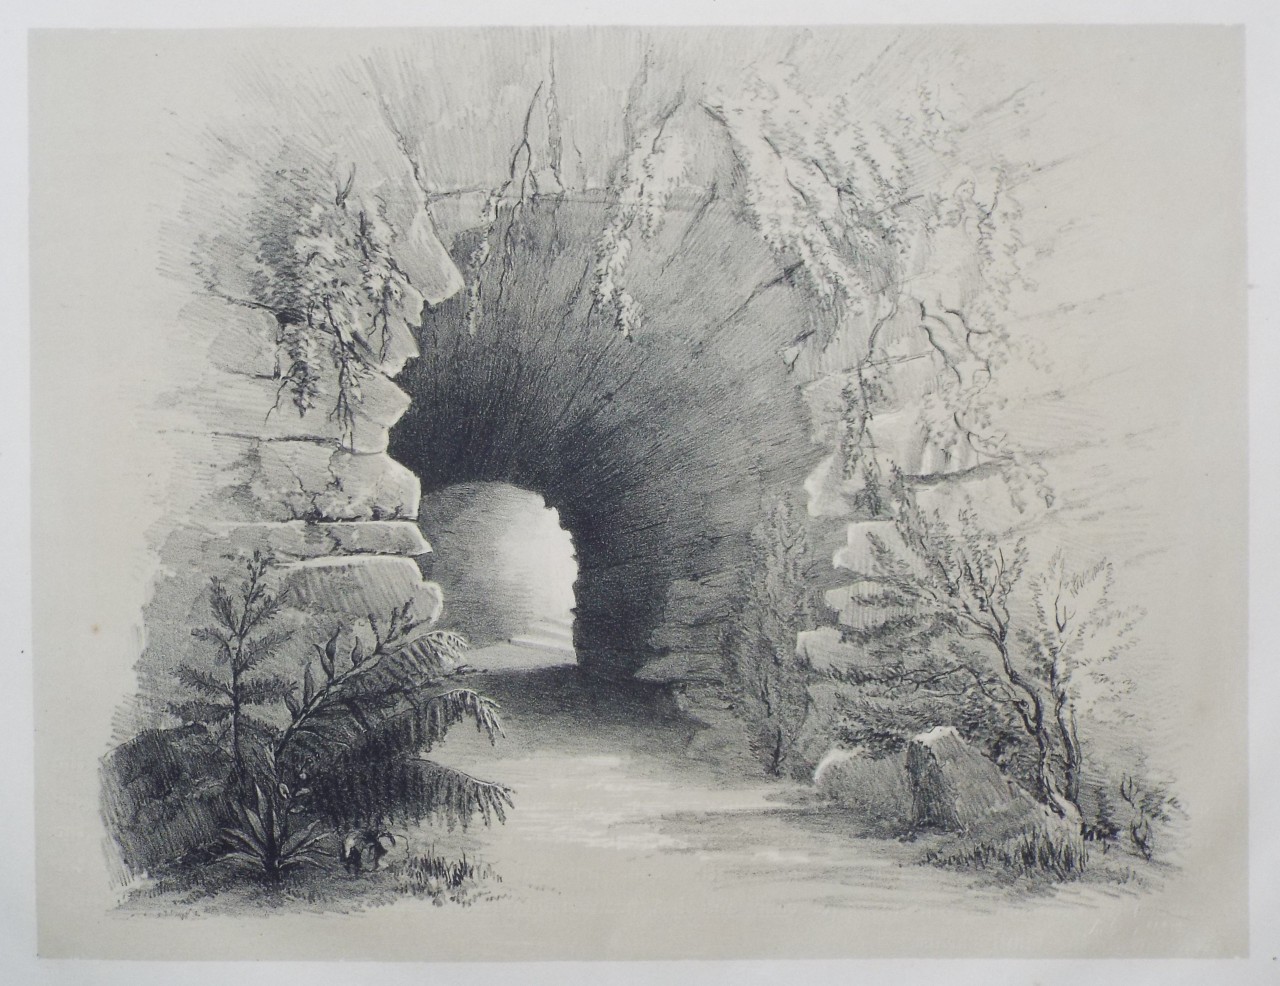 Lithograph - The Grotto in Garden. - Groom